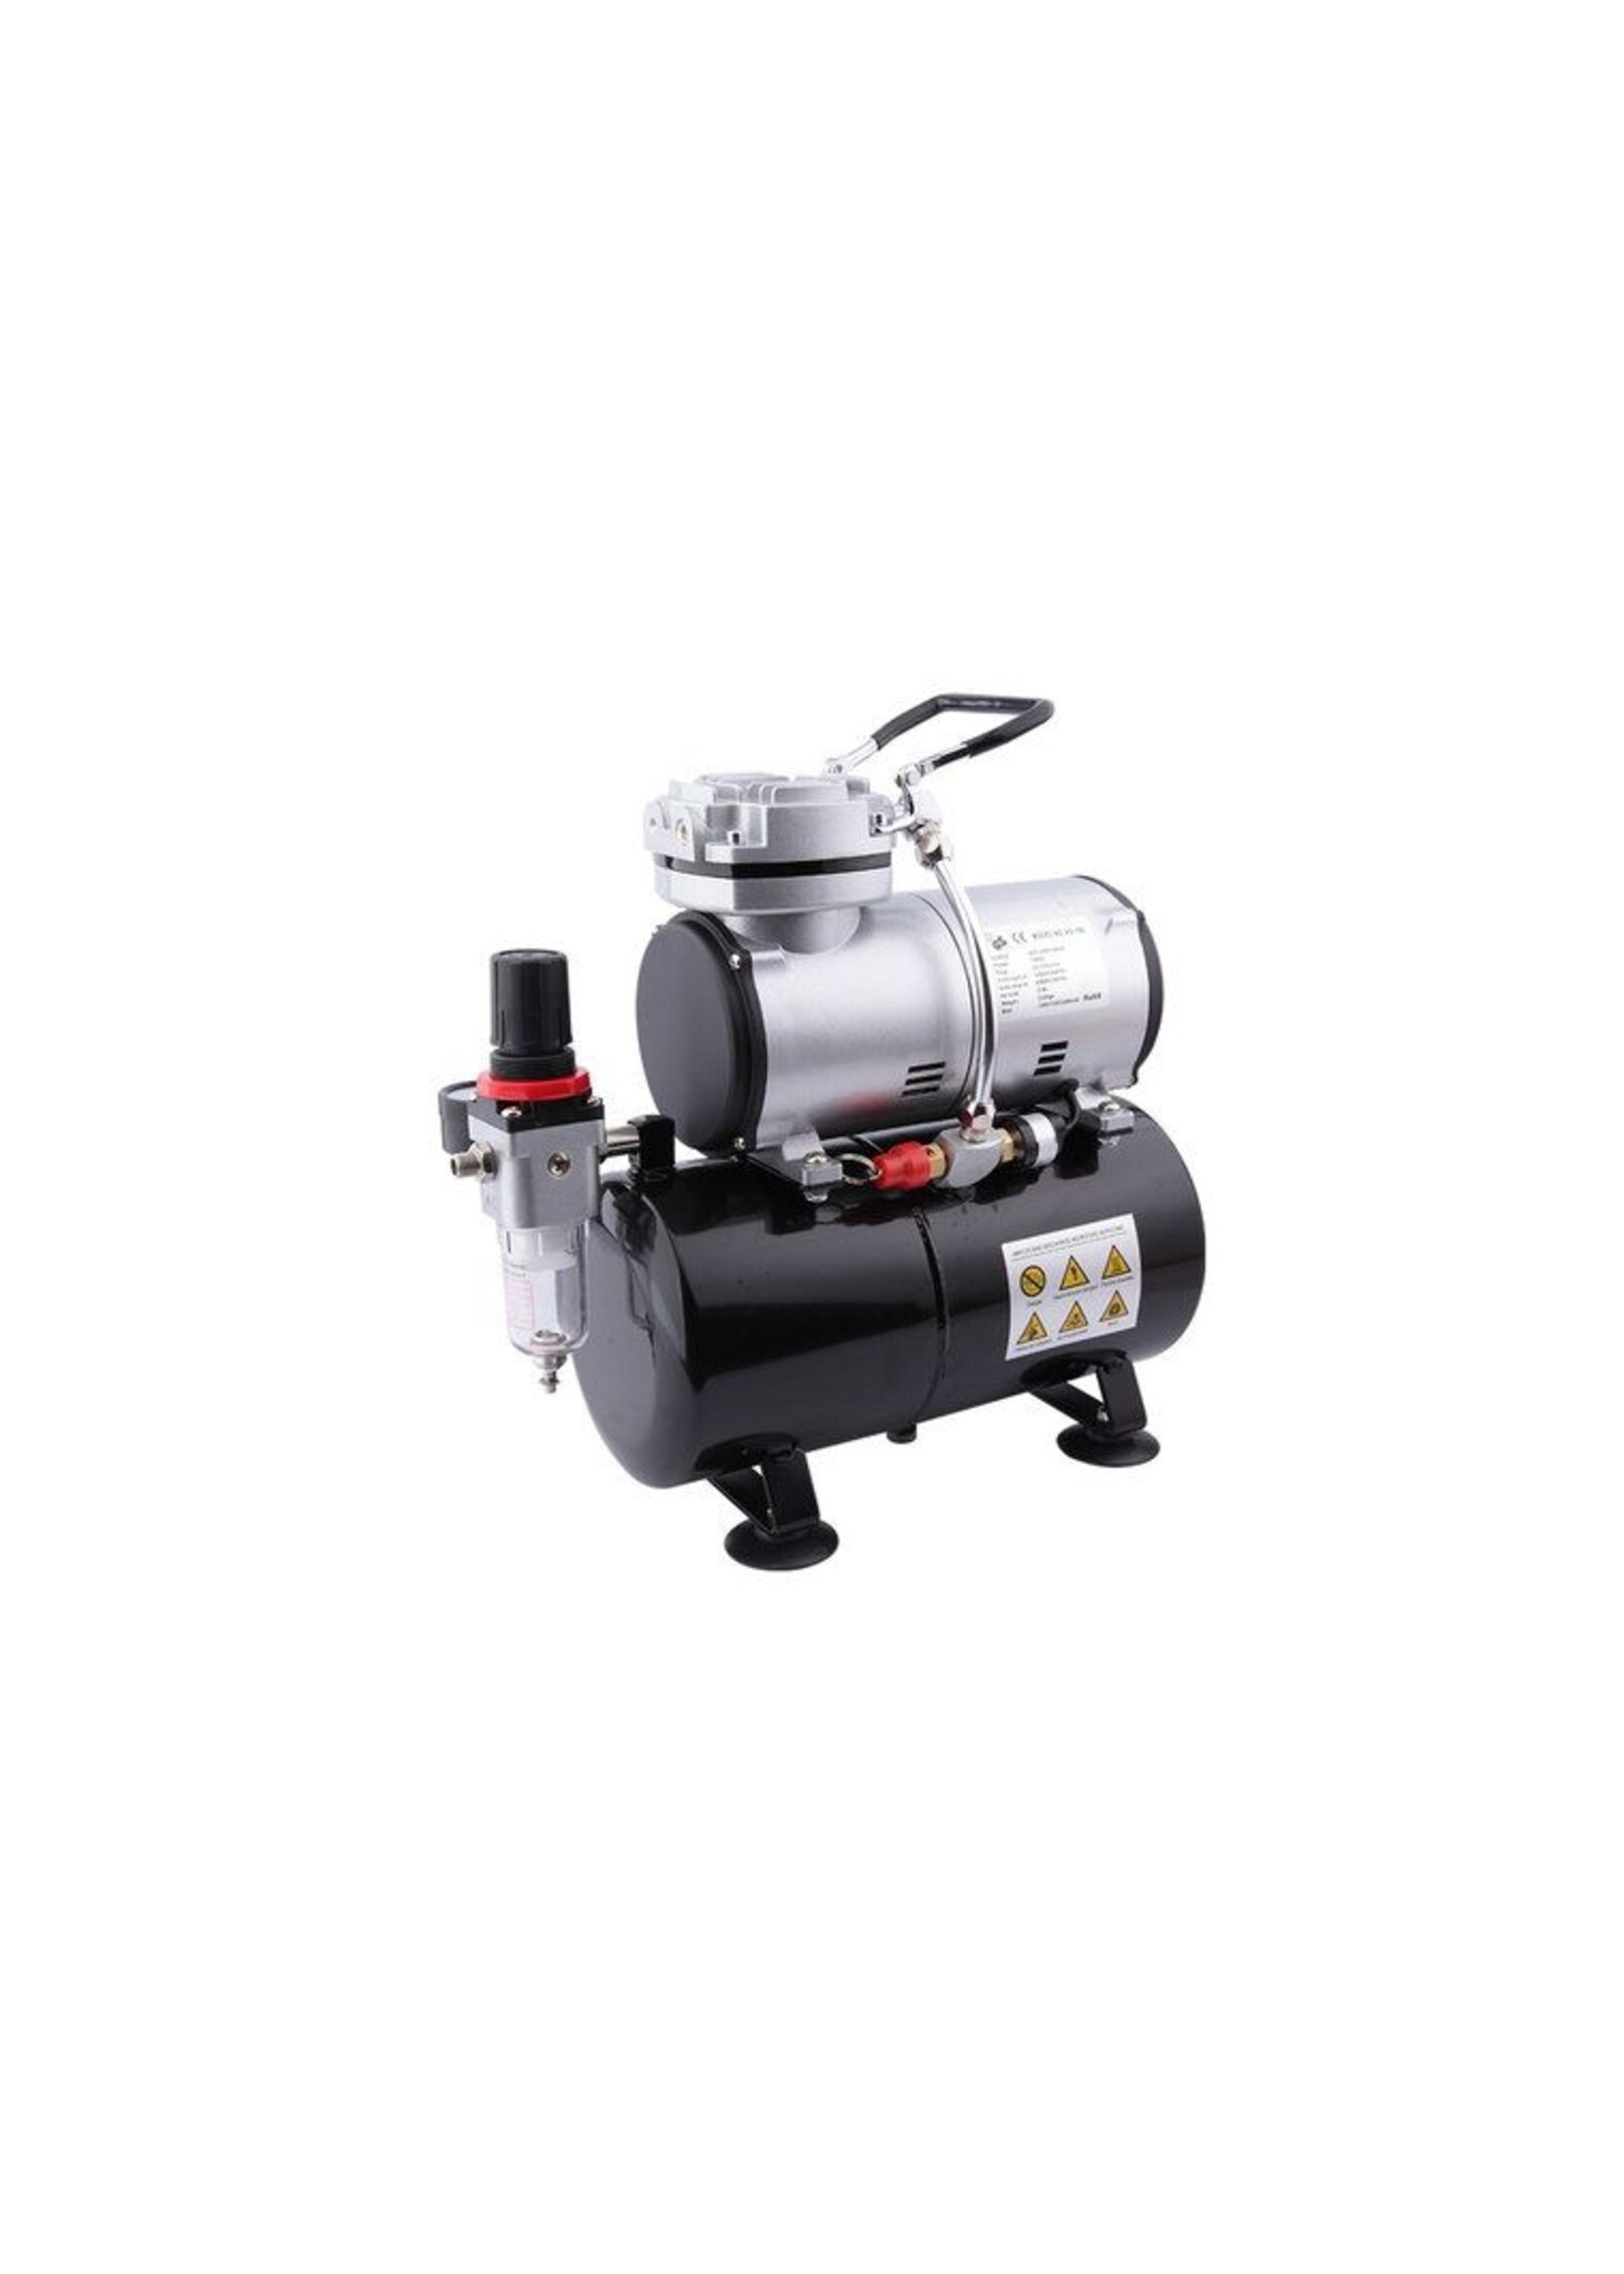 Northern Industrial Airbrush Compressor with Single Cylinder Motor